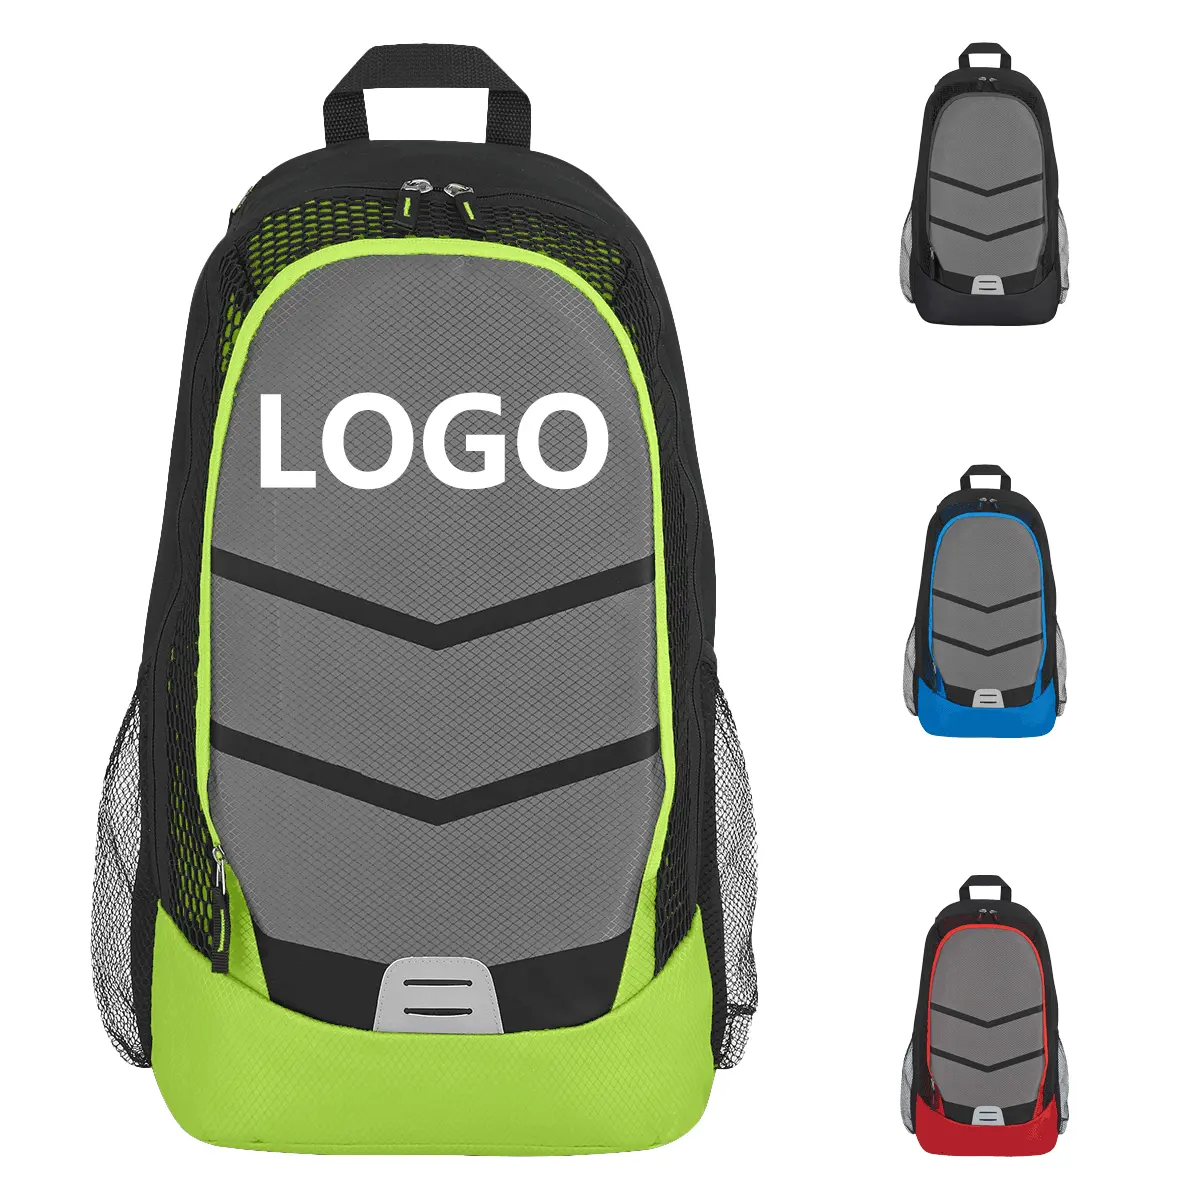 Makers computer backpacks 2023 waterproof with logo men women strudent travel business casual backpack